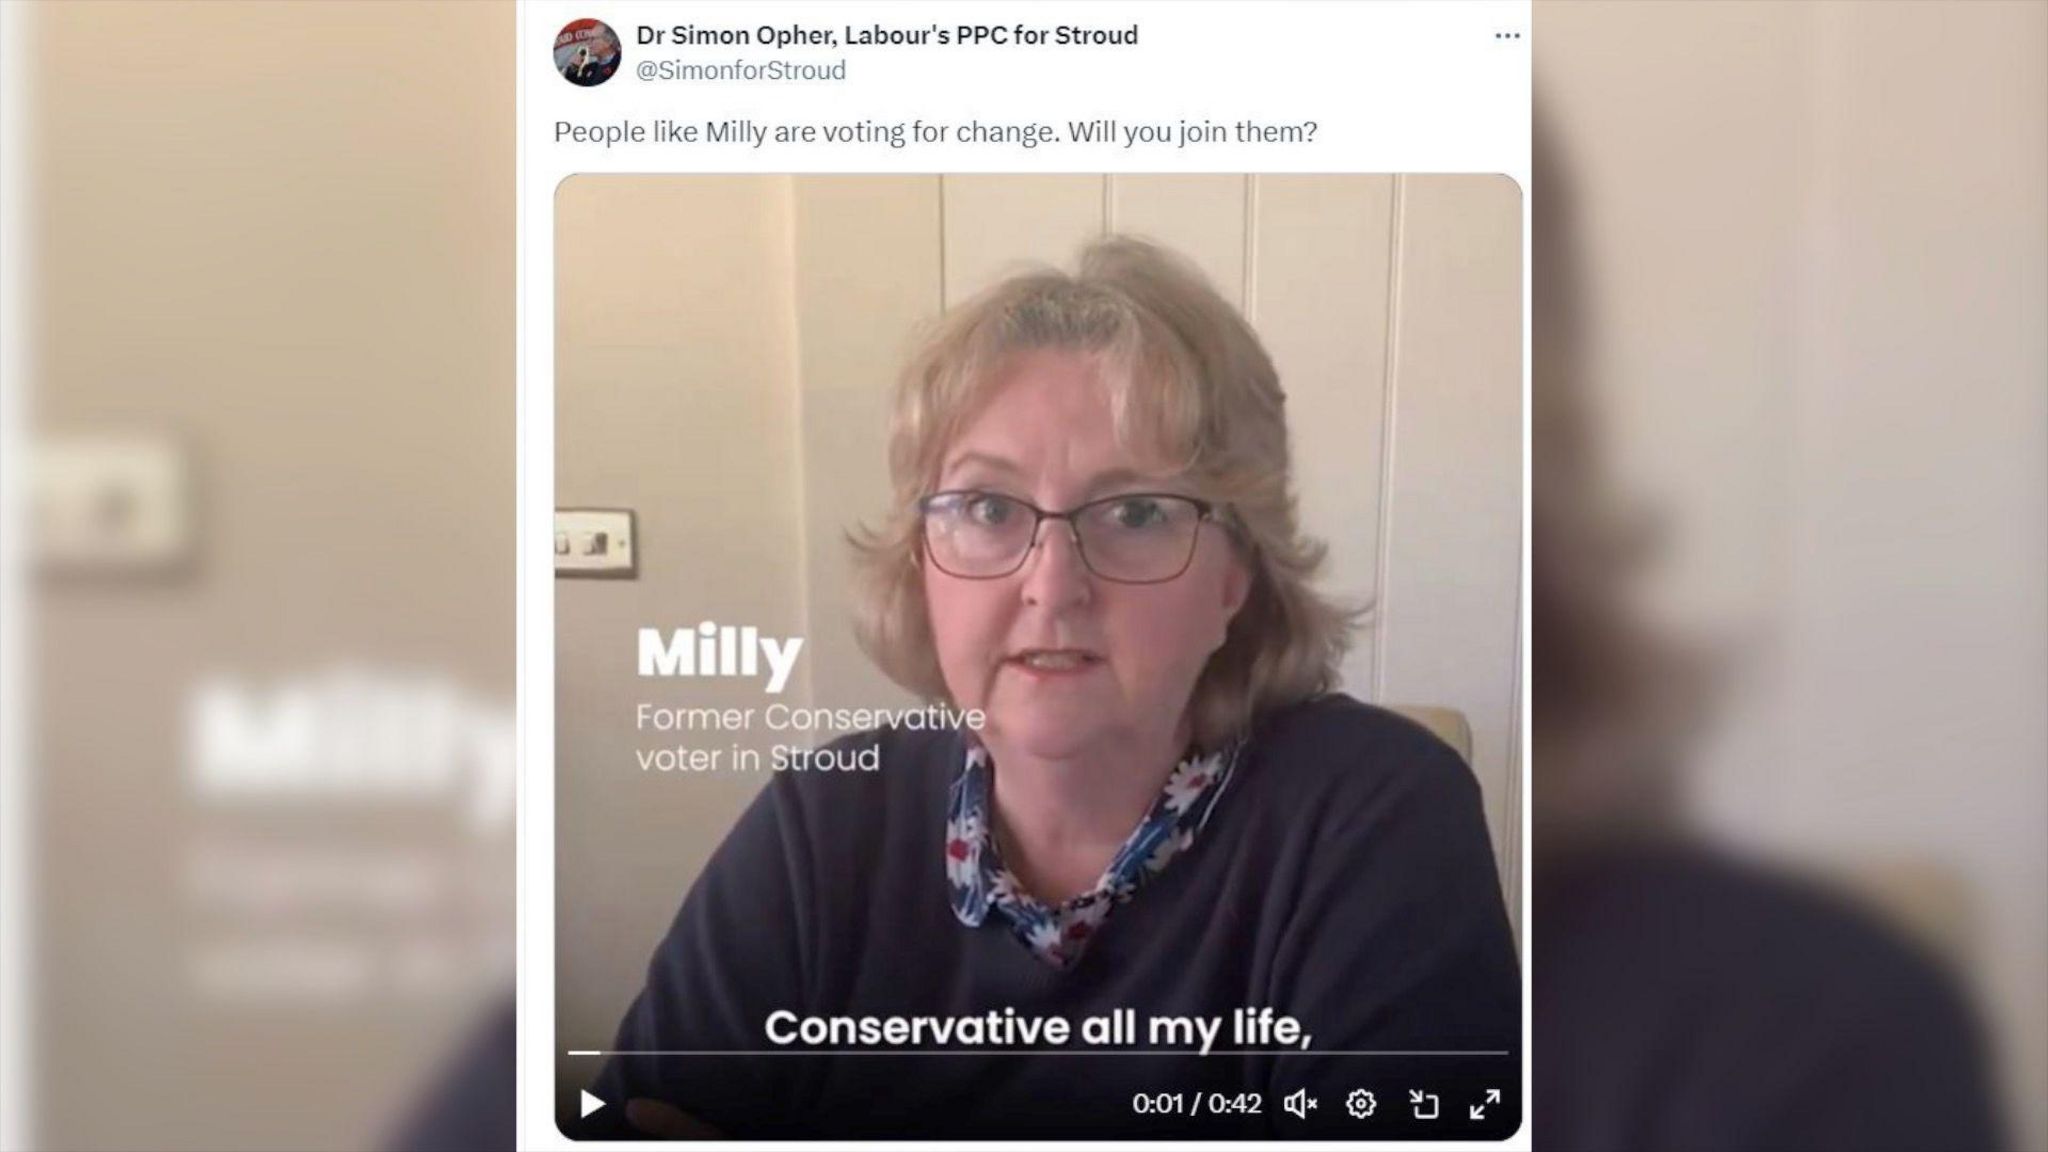 Screenshot of post from Dr Simon Opher showing Councillor Milly Hill